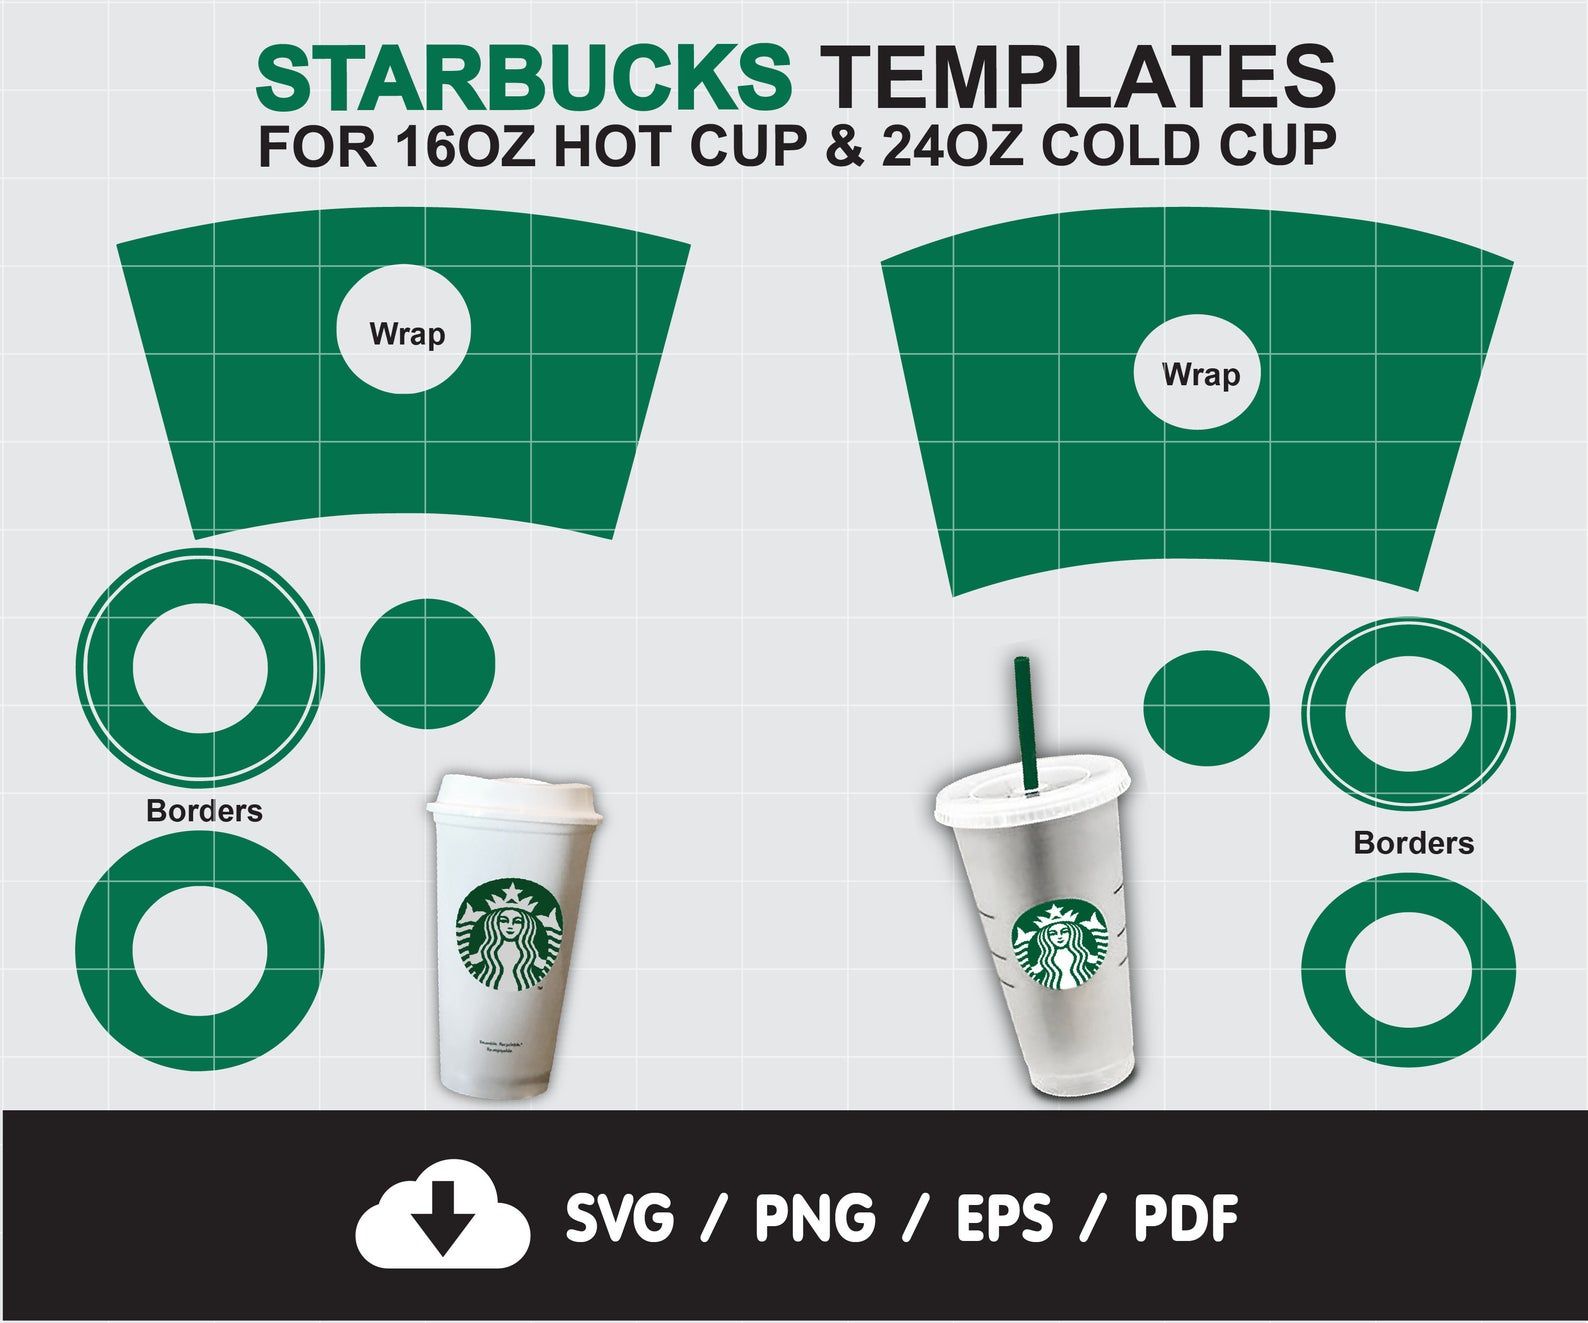 What size is the Starbucks logo on tumbler? - Foodly